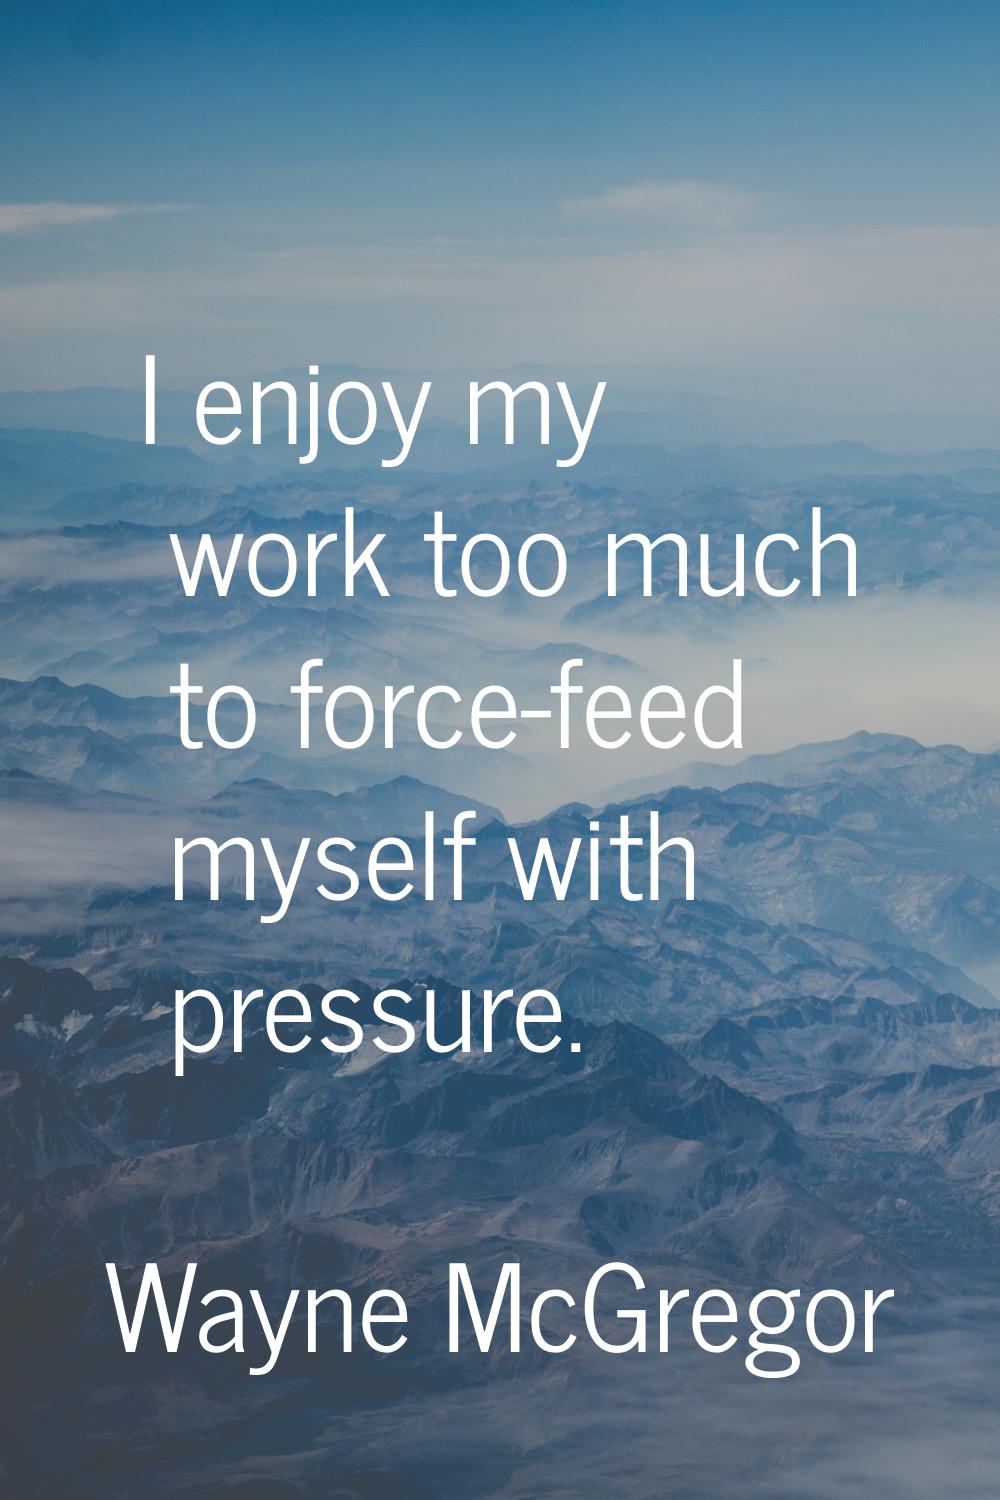 I enjoy my work too much to force-feed myself with pressure.